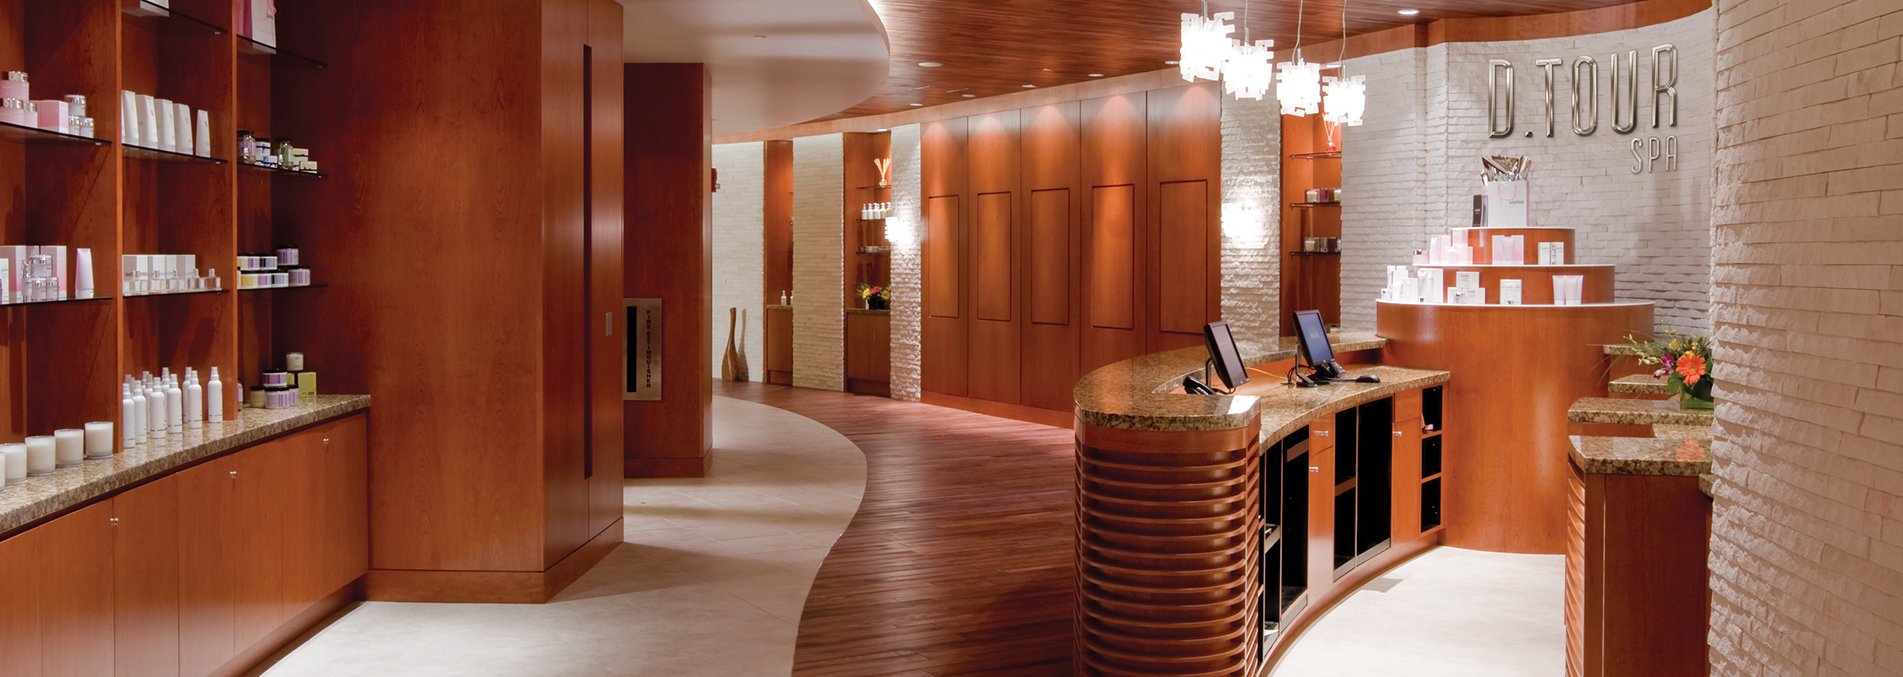 motor city casino spa packages